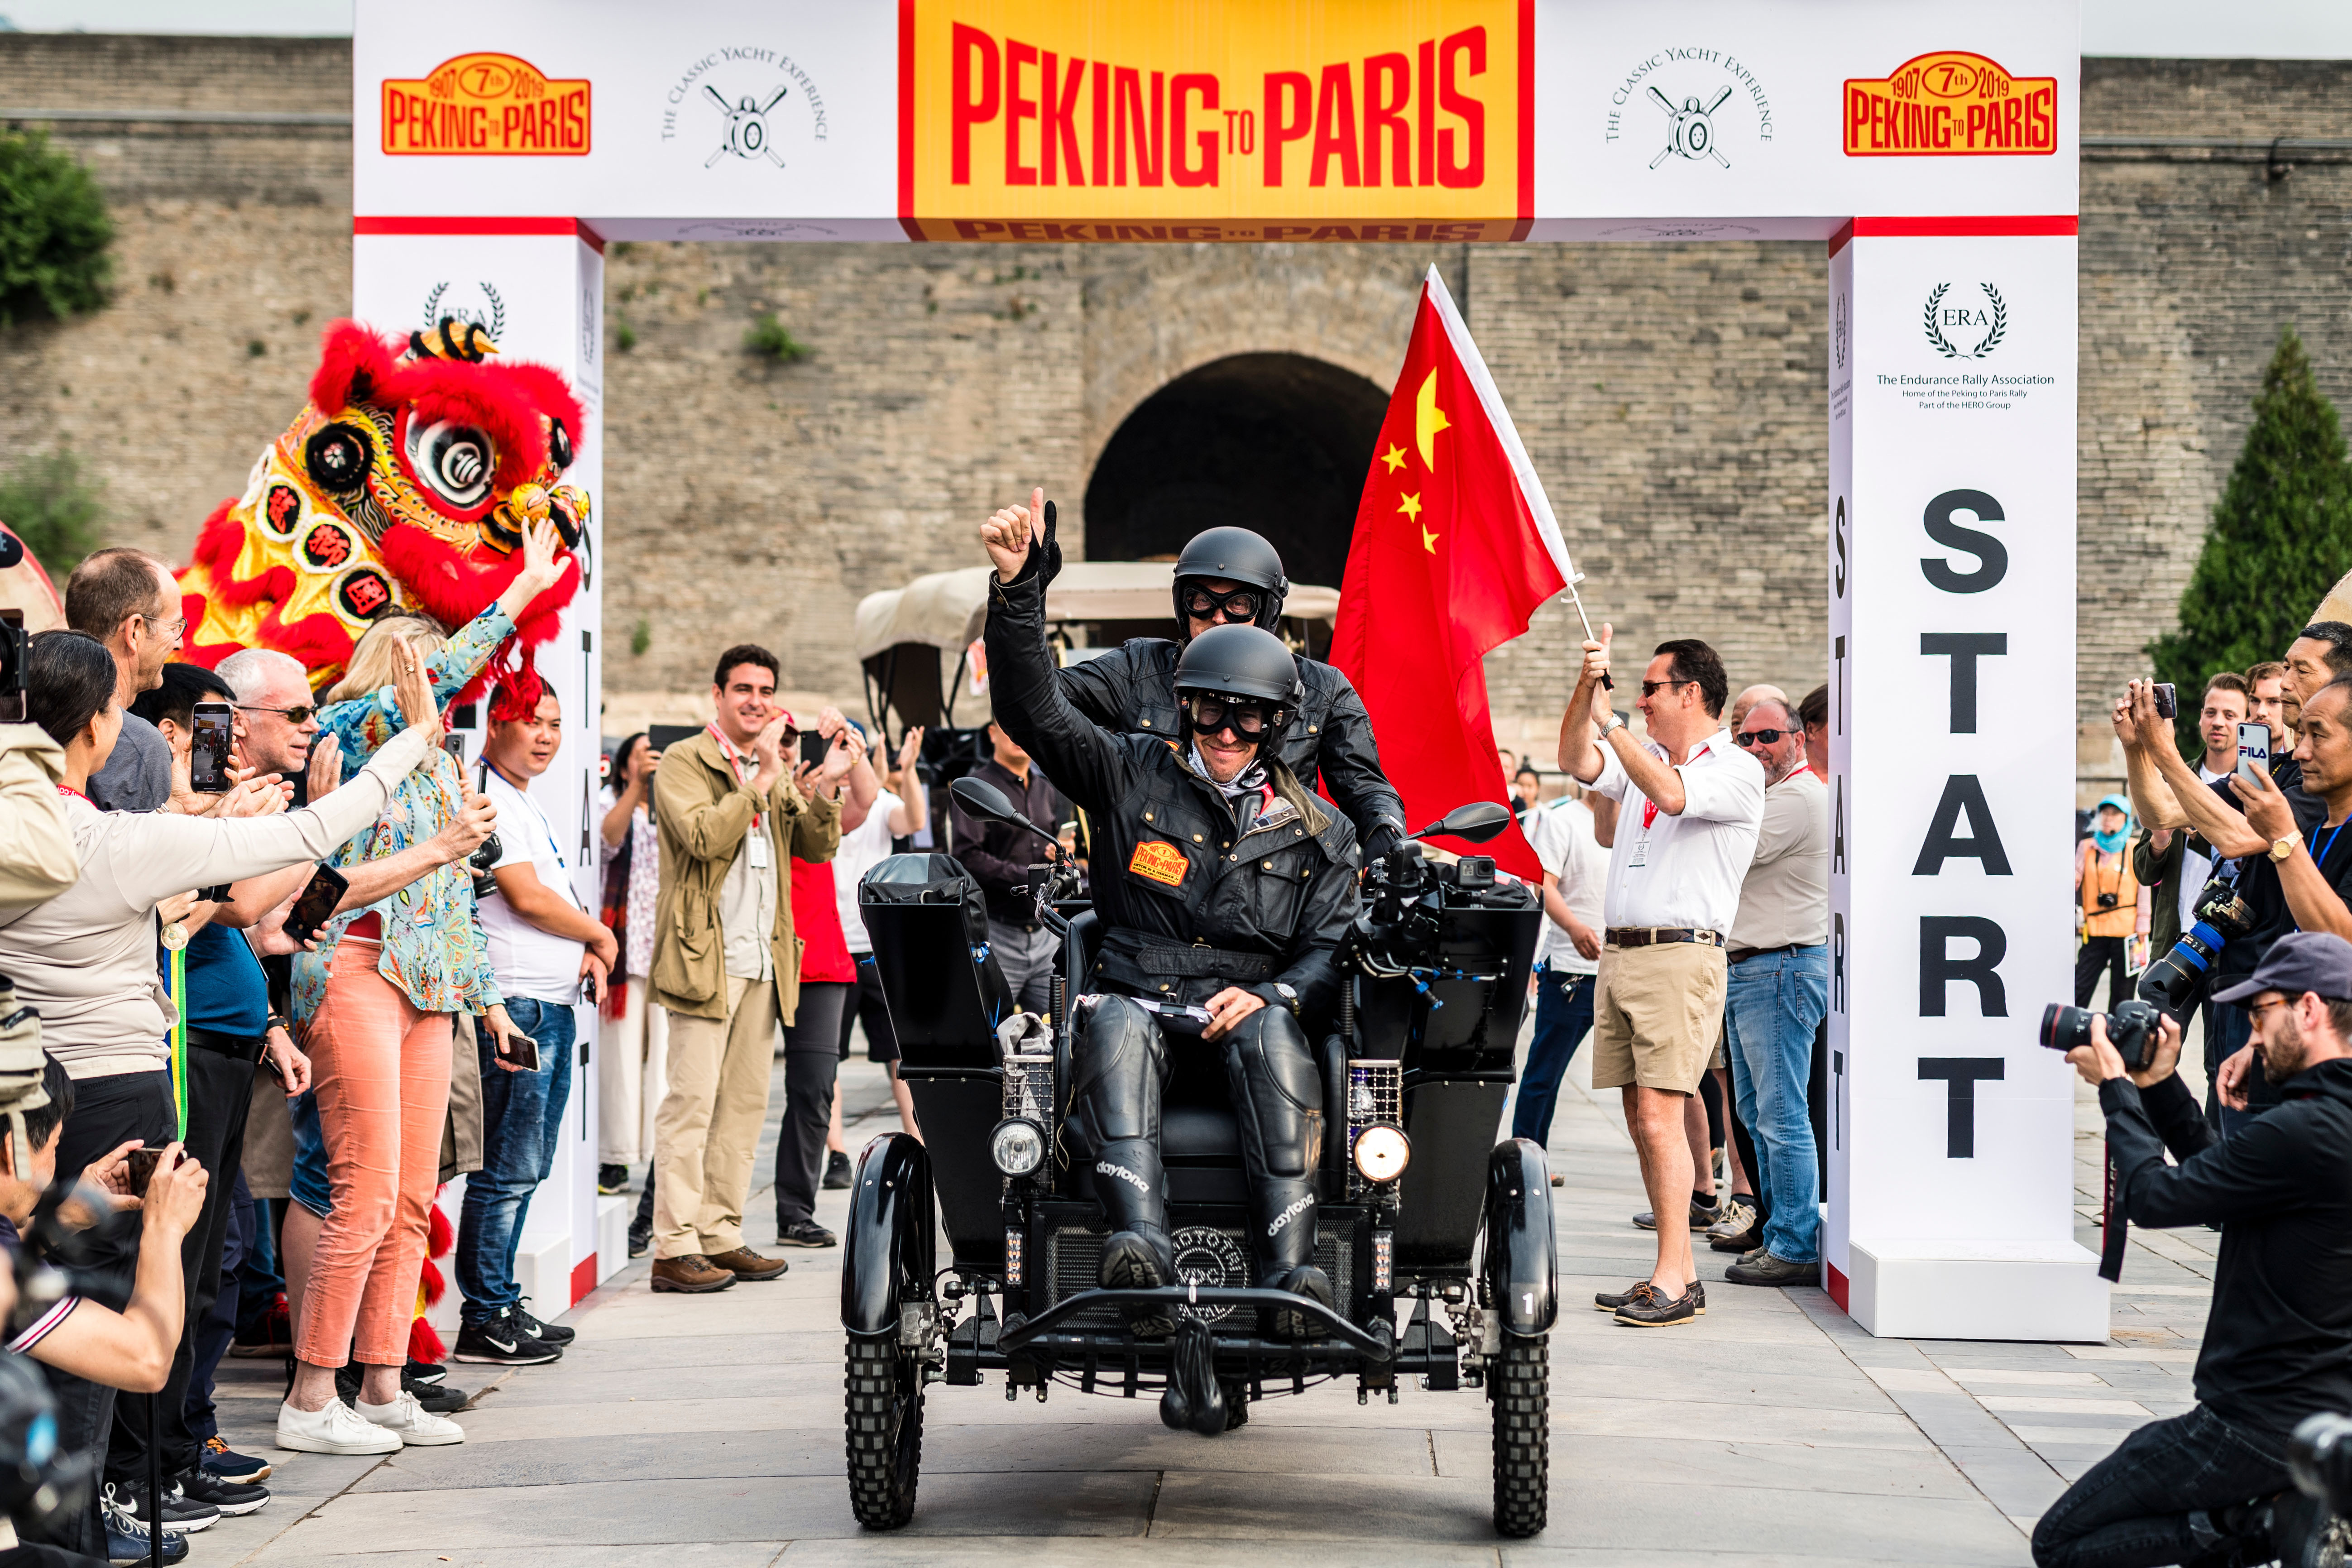 Peking to Paris rally, 87-year-old driver wins Peking to Paris rally for third time, ClassicCars.com Journal